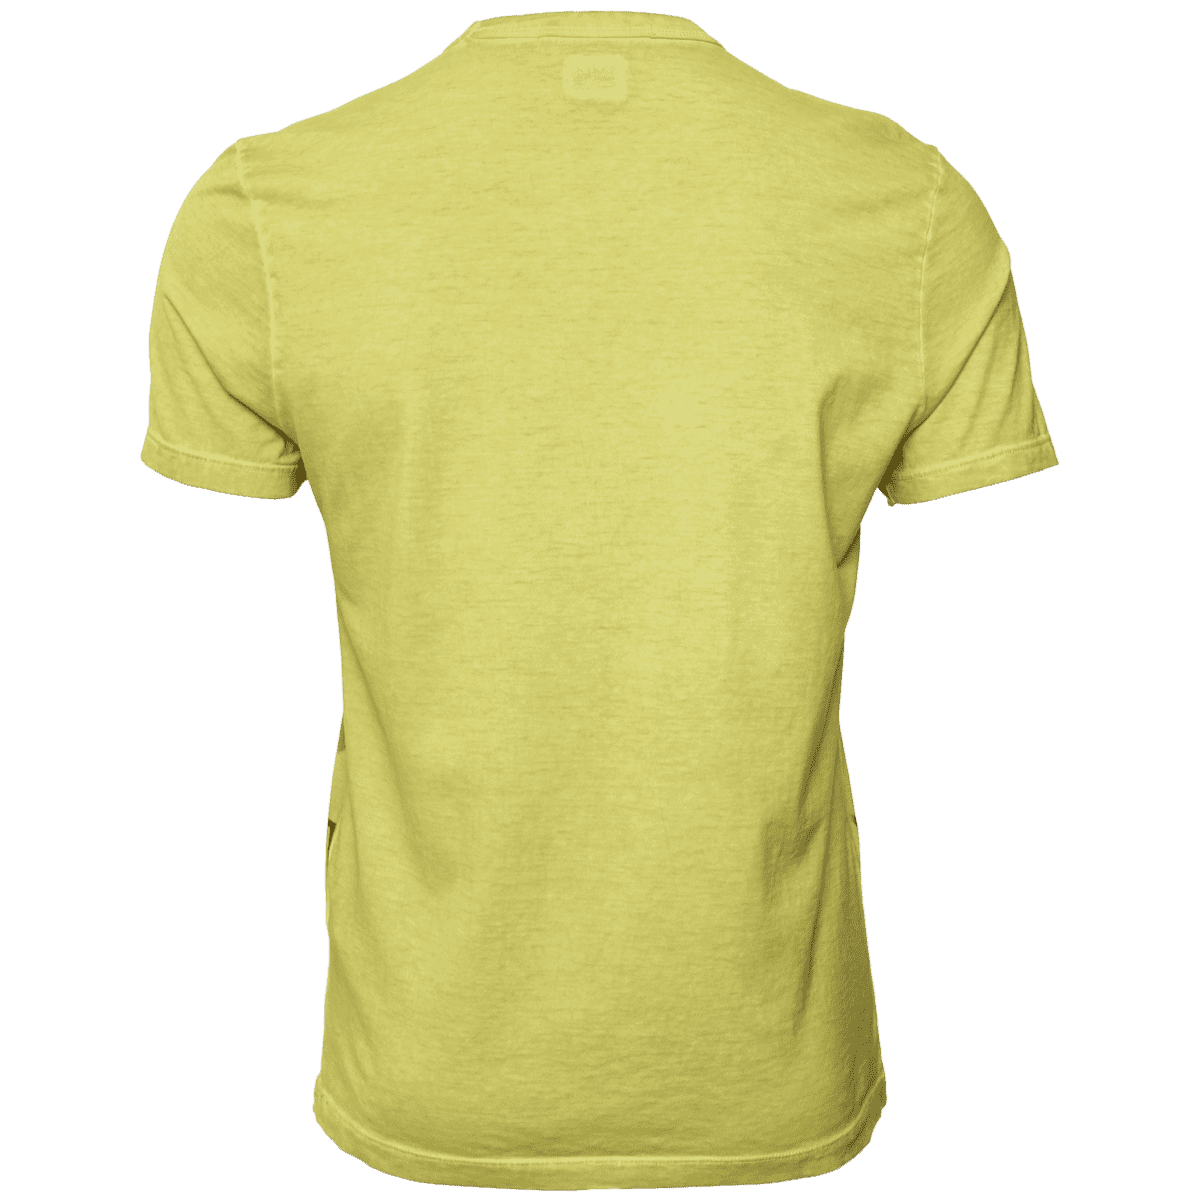 Cabinero Berlin Herrenmode SS17 C.P.Company T-Shirt 02CMTS151A000444S (4)